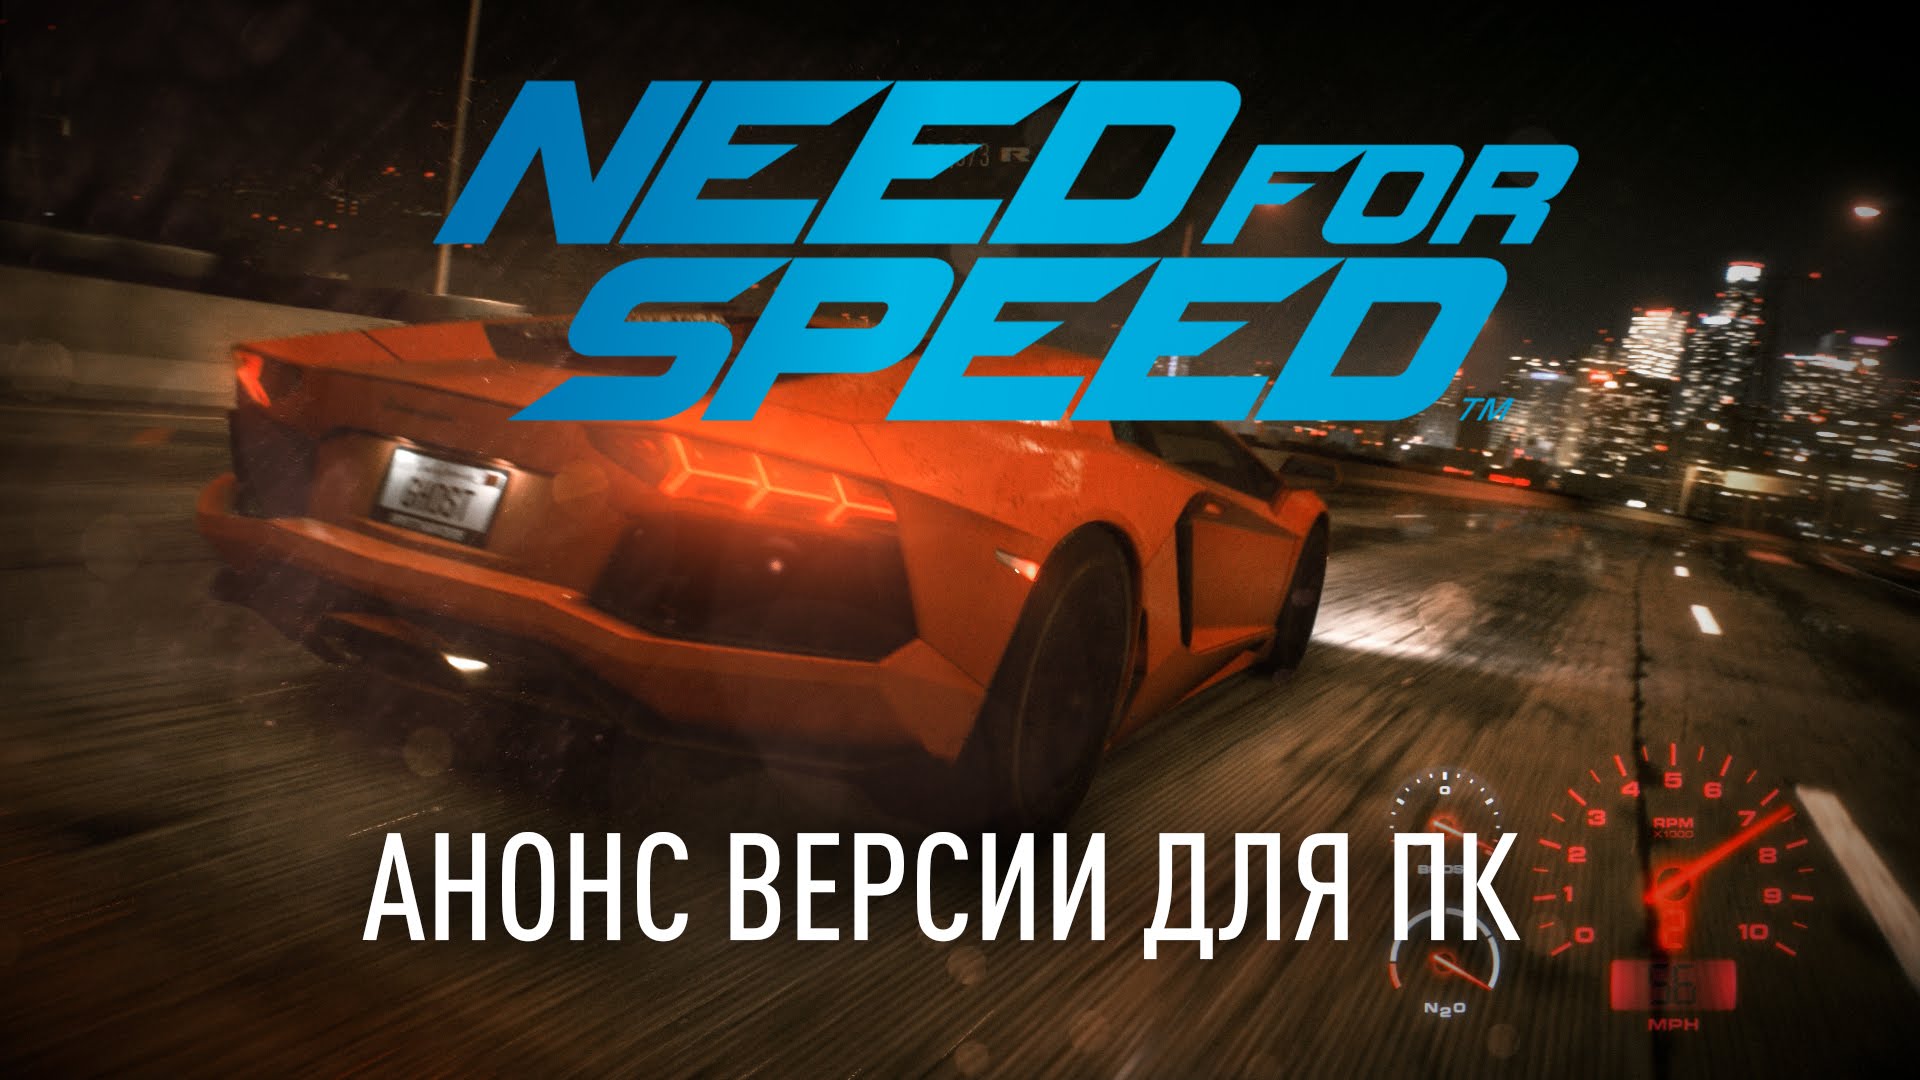 Гонки need for Speed трейлер. Need for Drive Team. Live for Speed. Кто такой Speed. All you need game